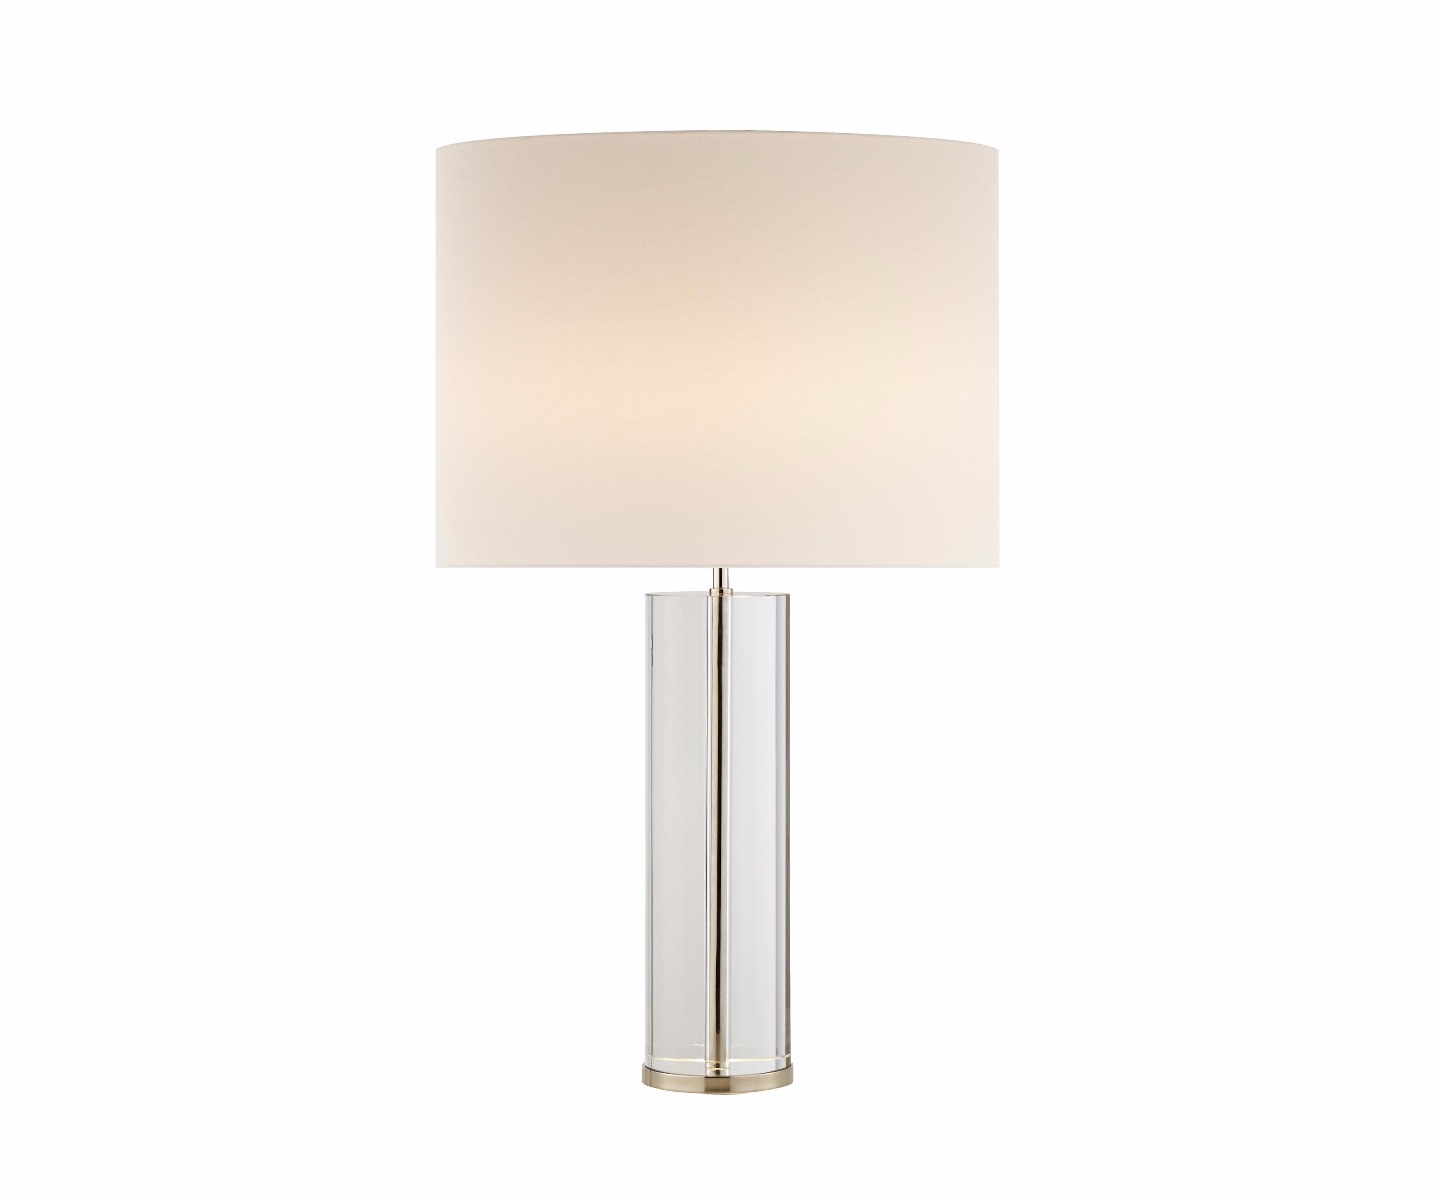 Luxury mirrored stand table lamp by Luxuria London